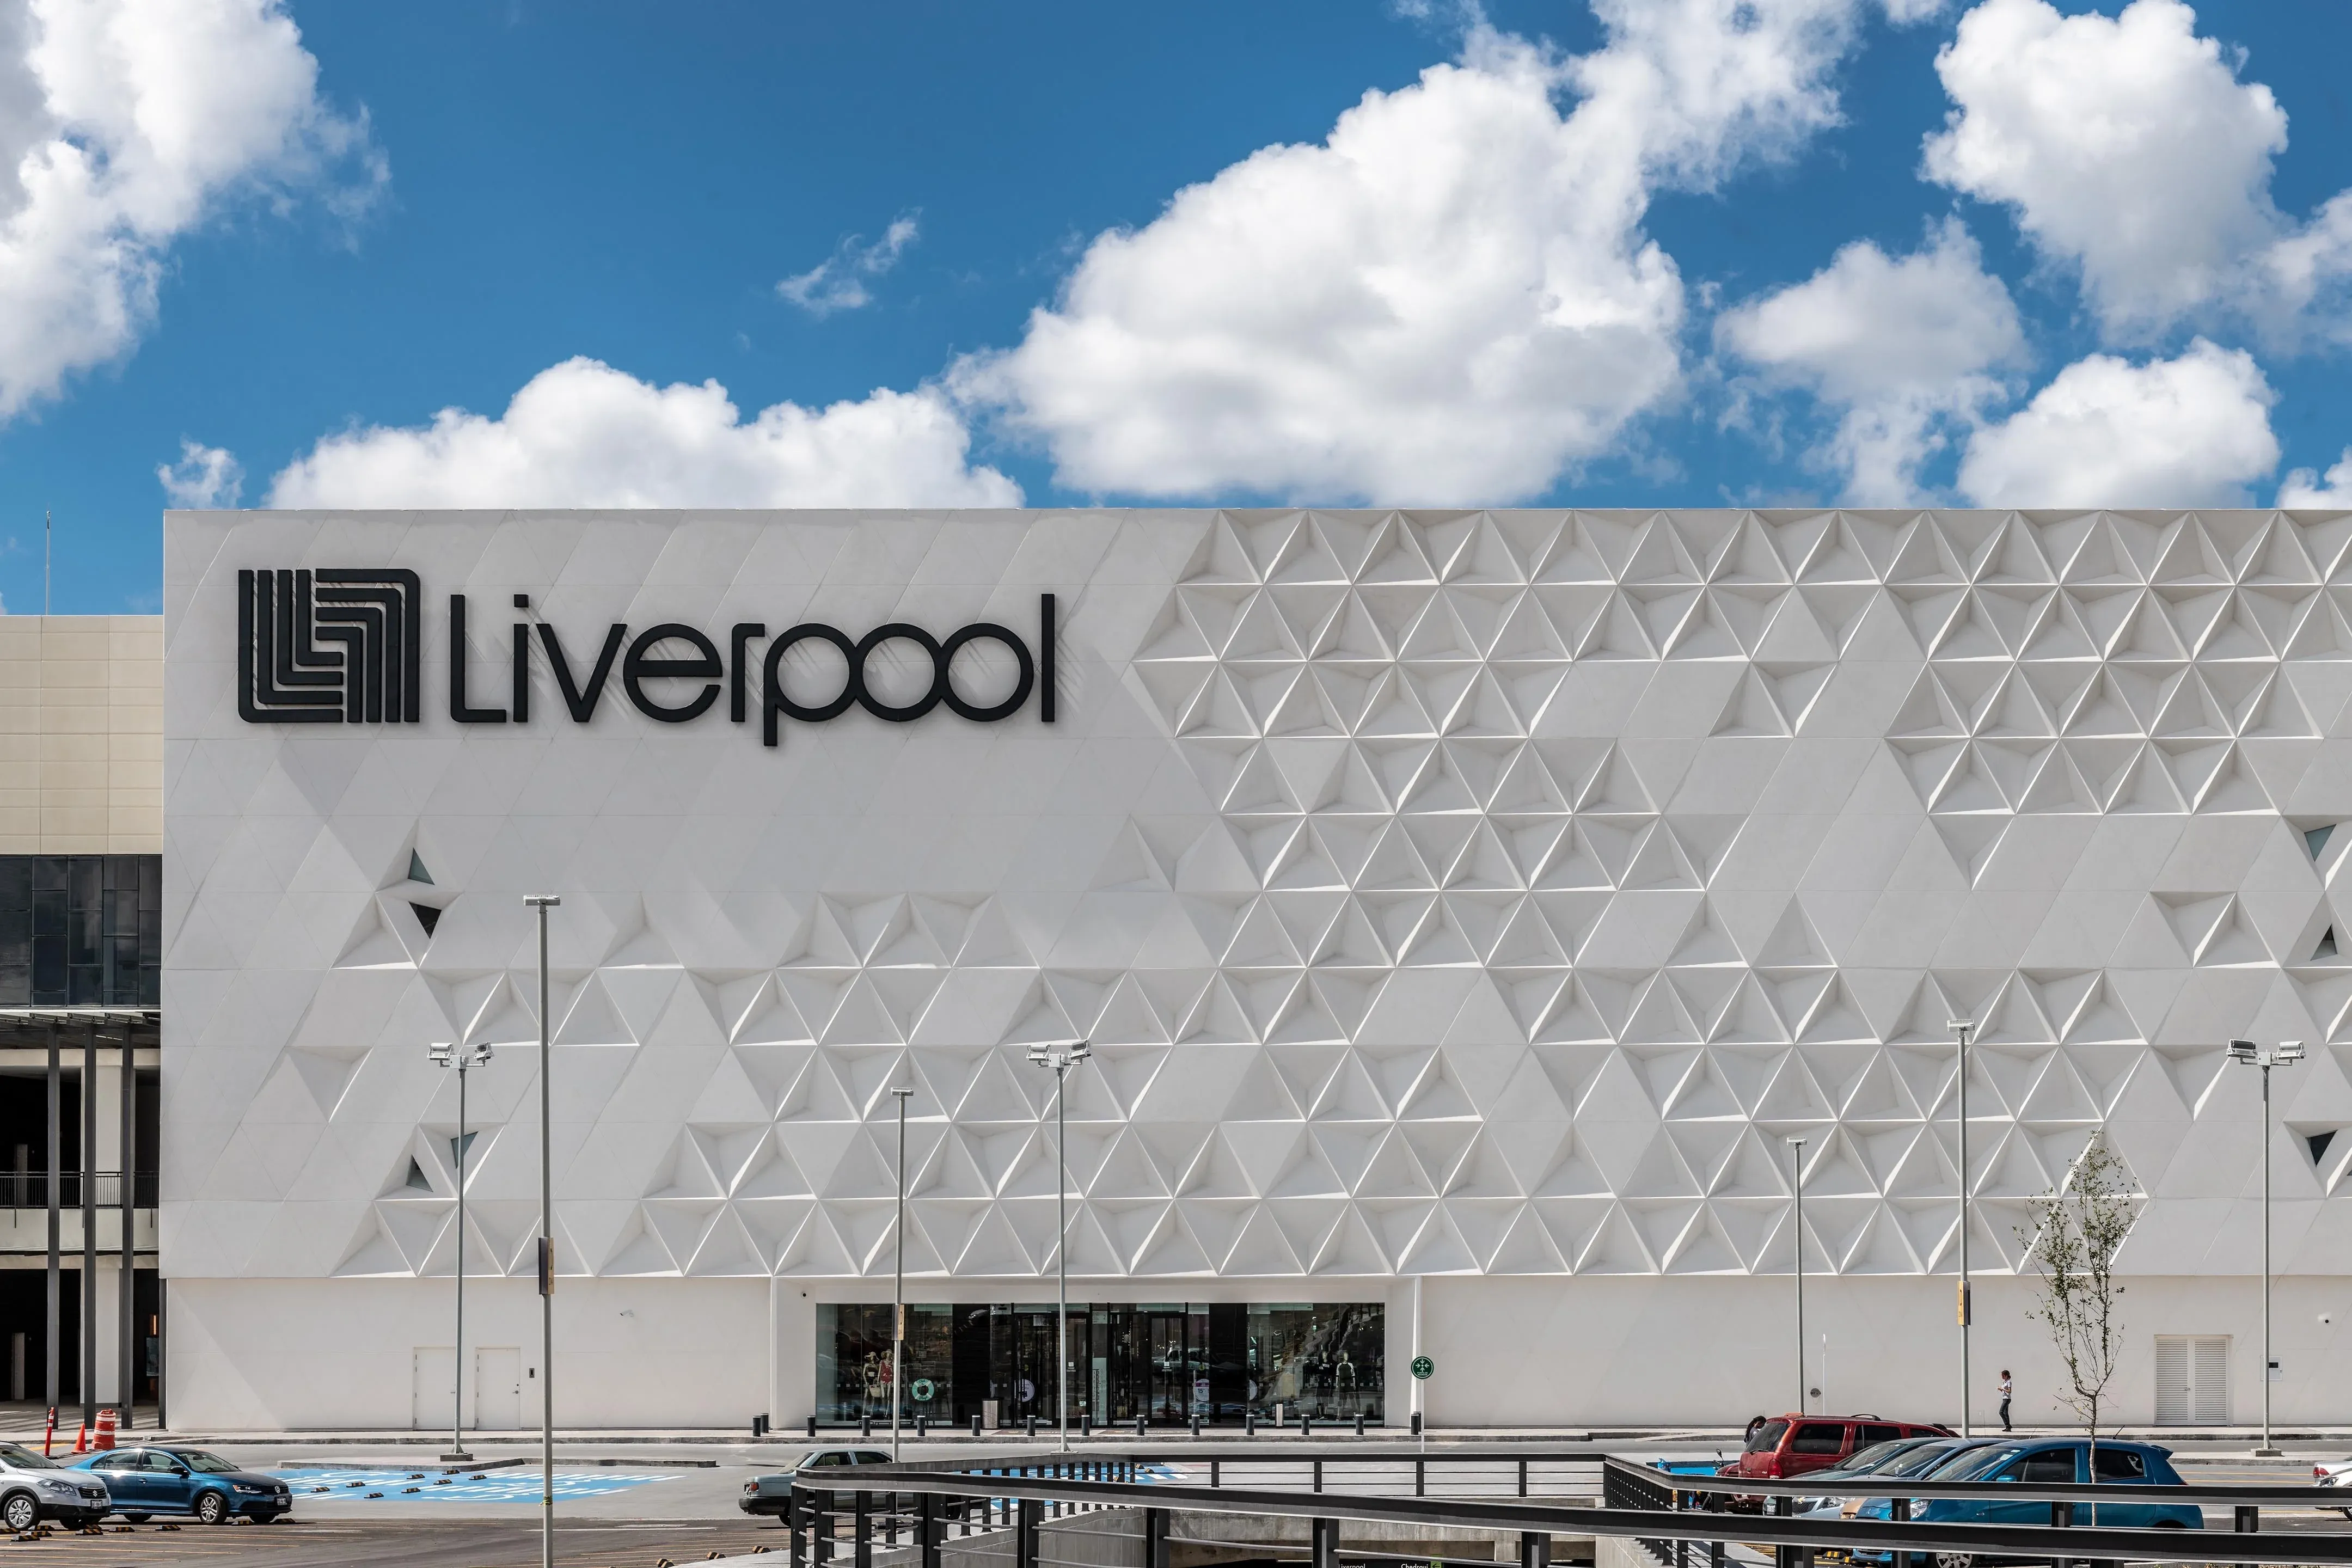 Liverpool in Mexico, north_america | Fragrance,Shoes,Accessories,Clothes,Cosmetics - Country Helper